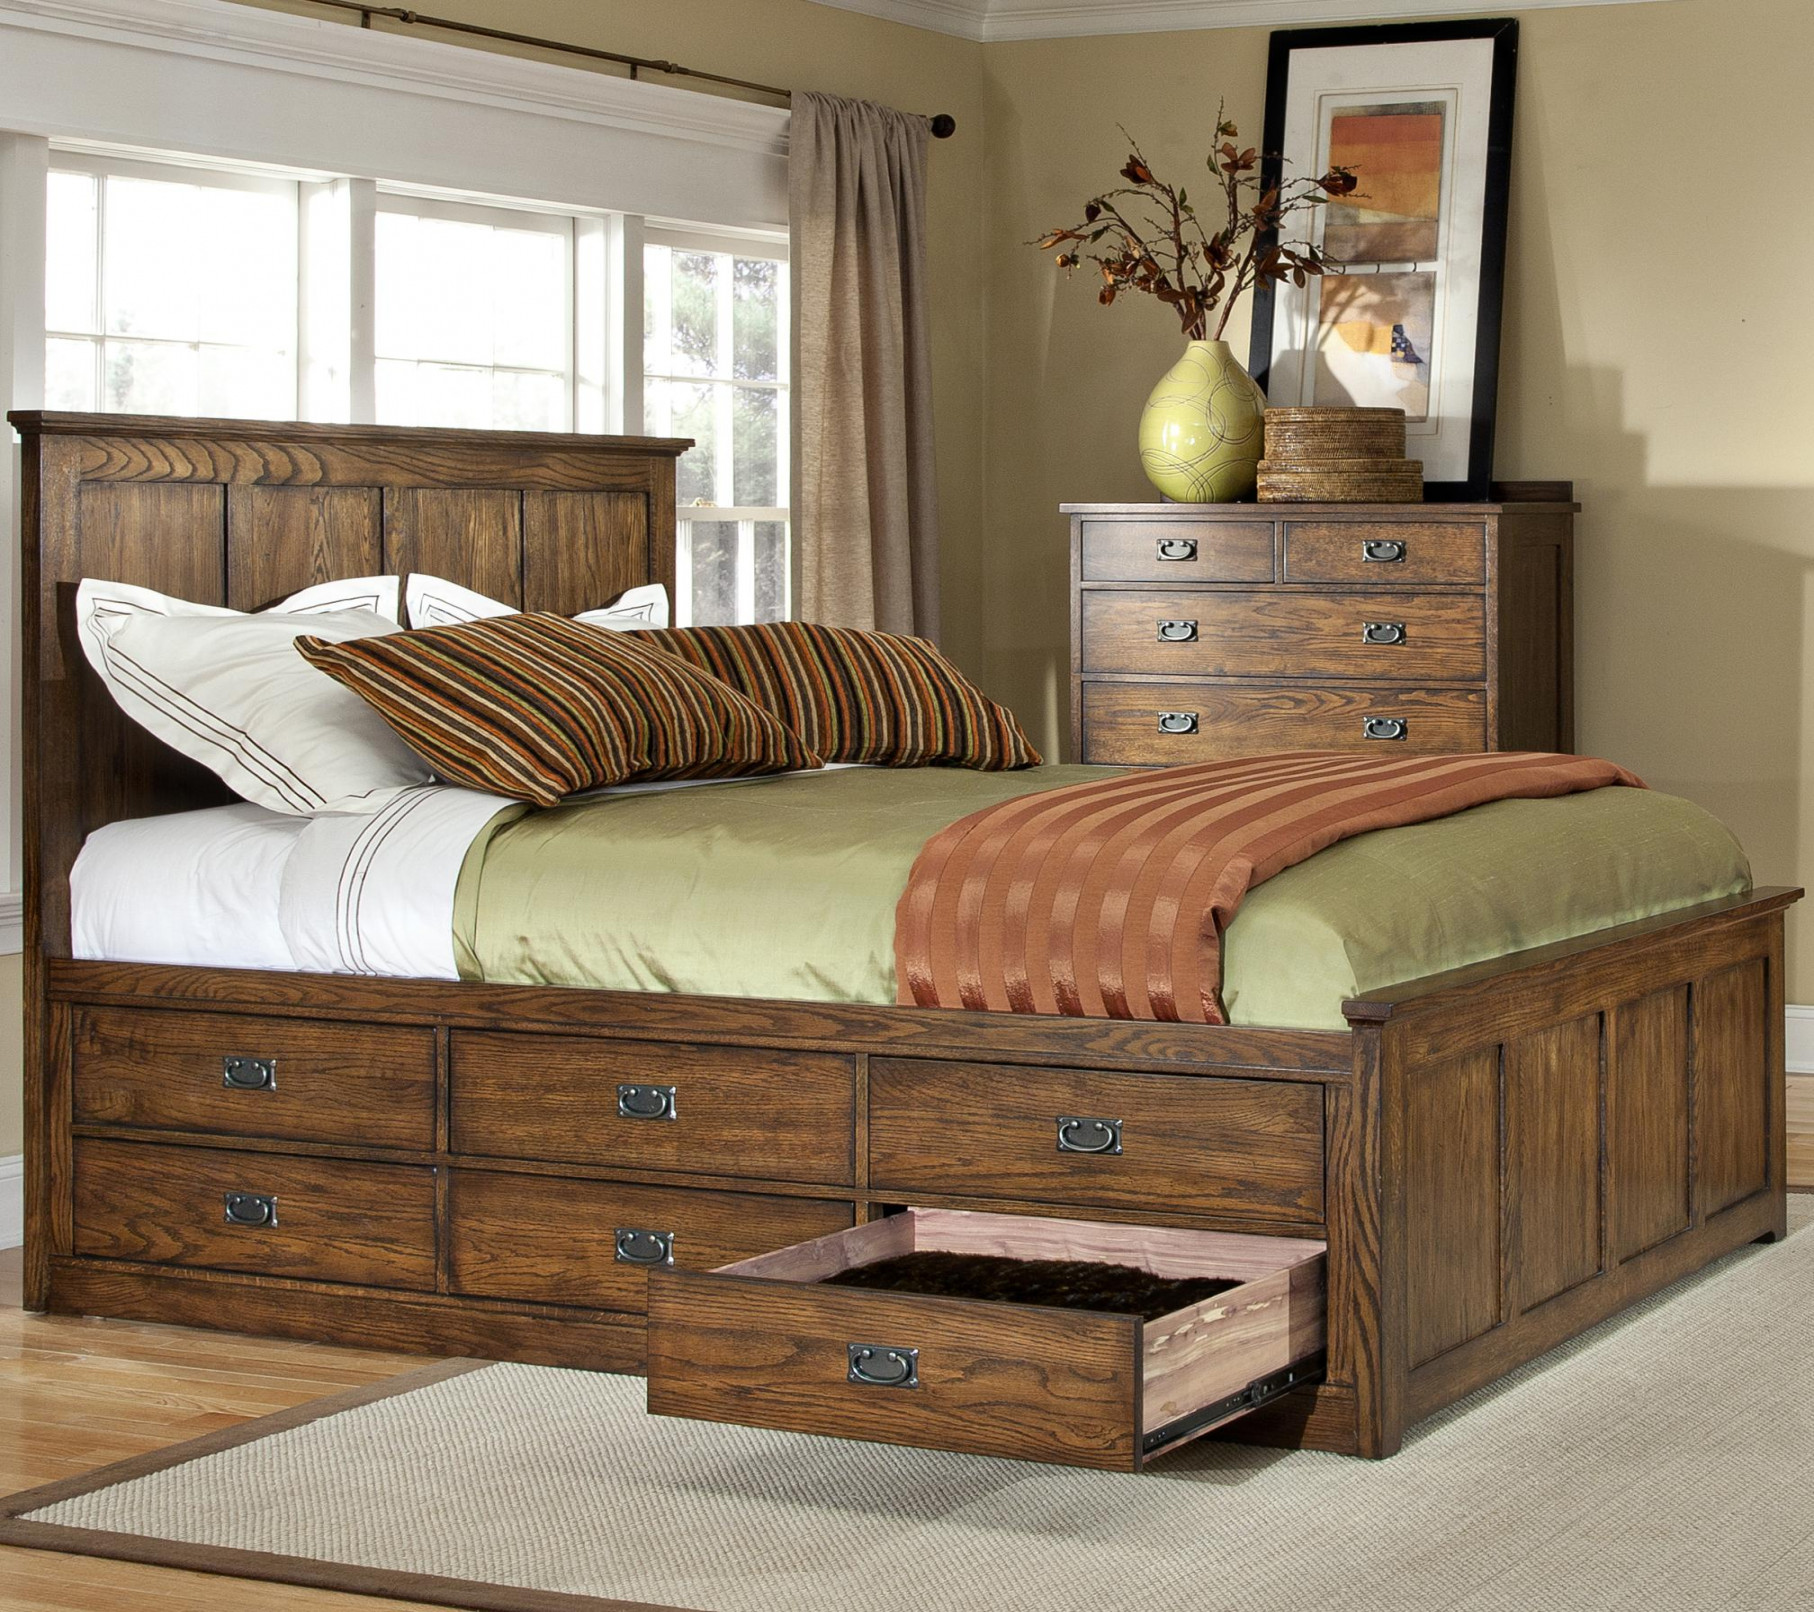 King Bed With Storage Underneath